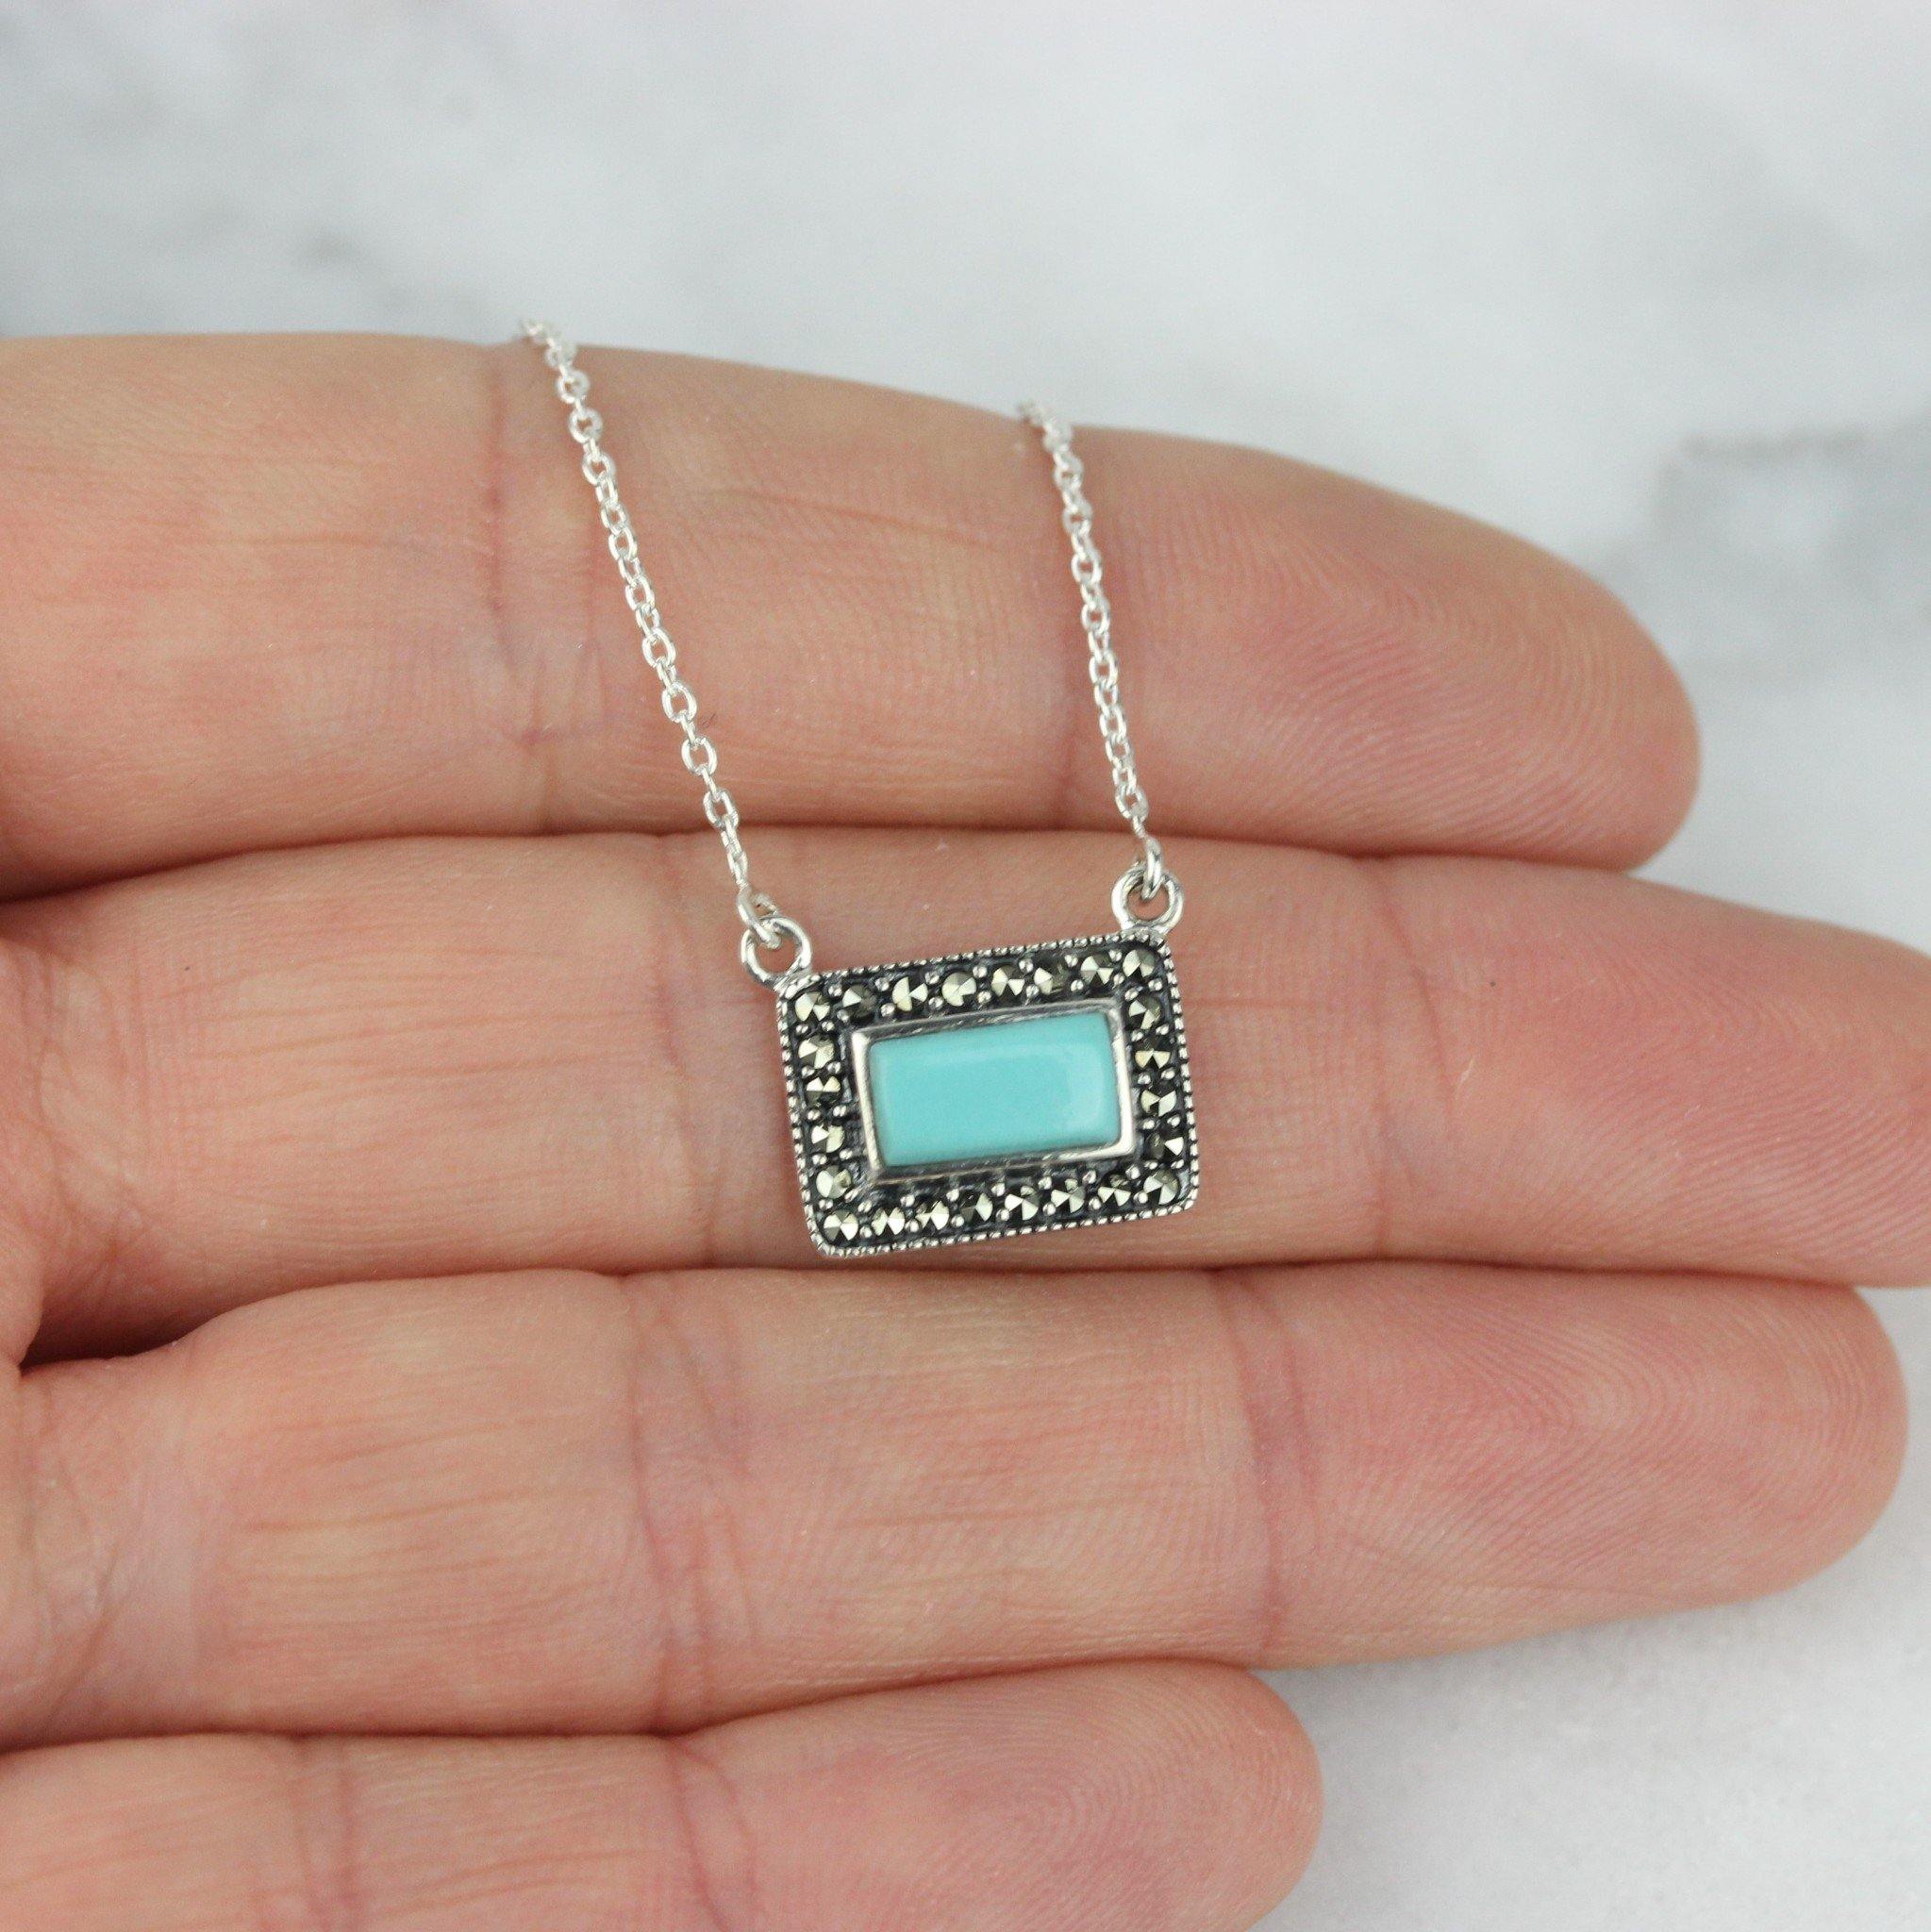 Sterling Silver Marcasite & Turquoise Rectangular Halo Pendant Necklace 40cm - STERLING SILVER DESIGNS